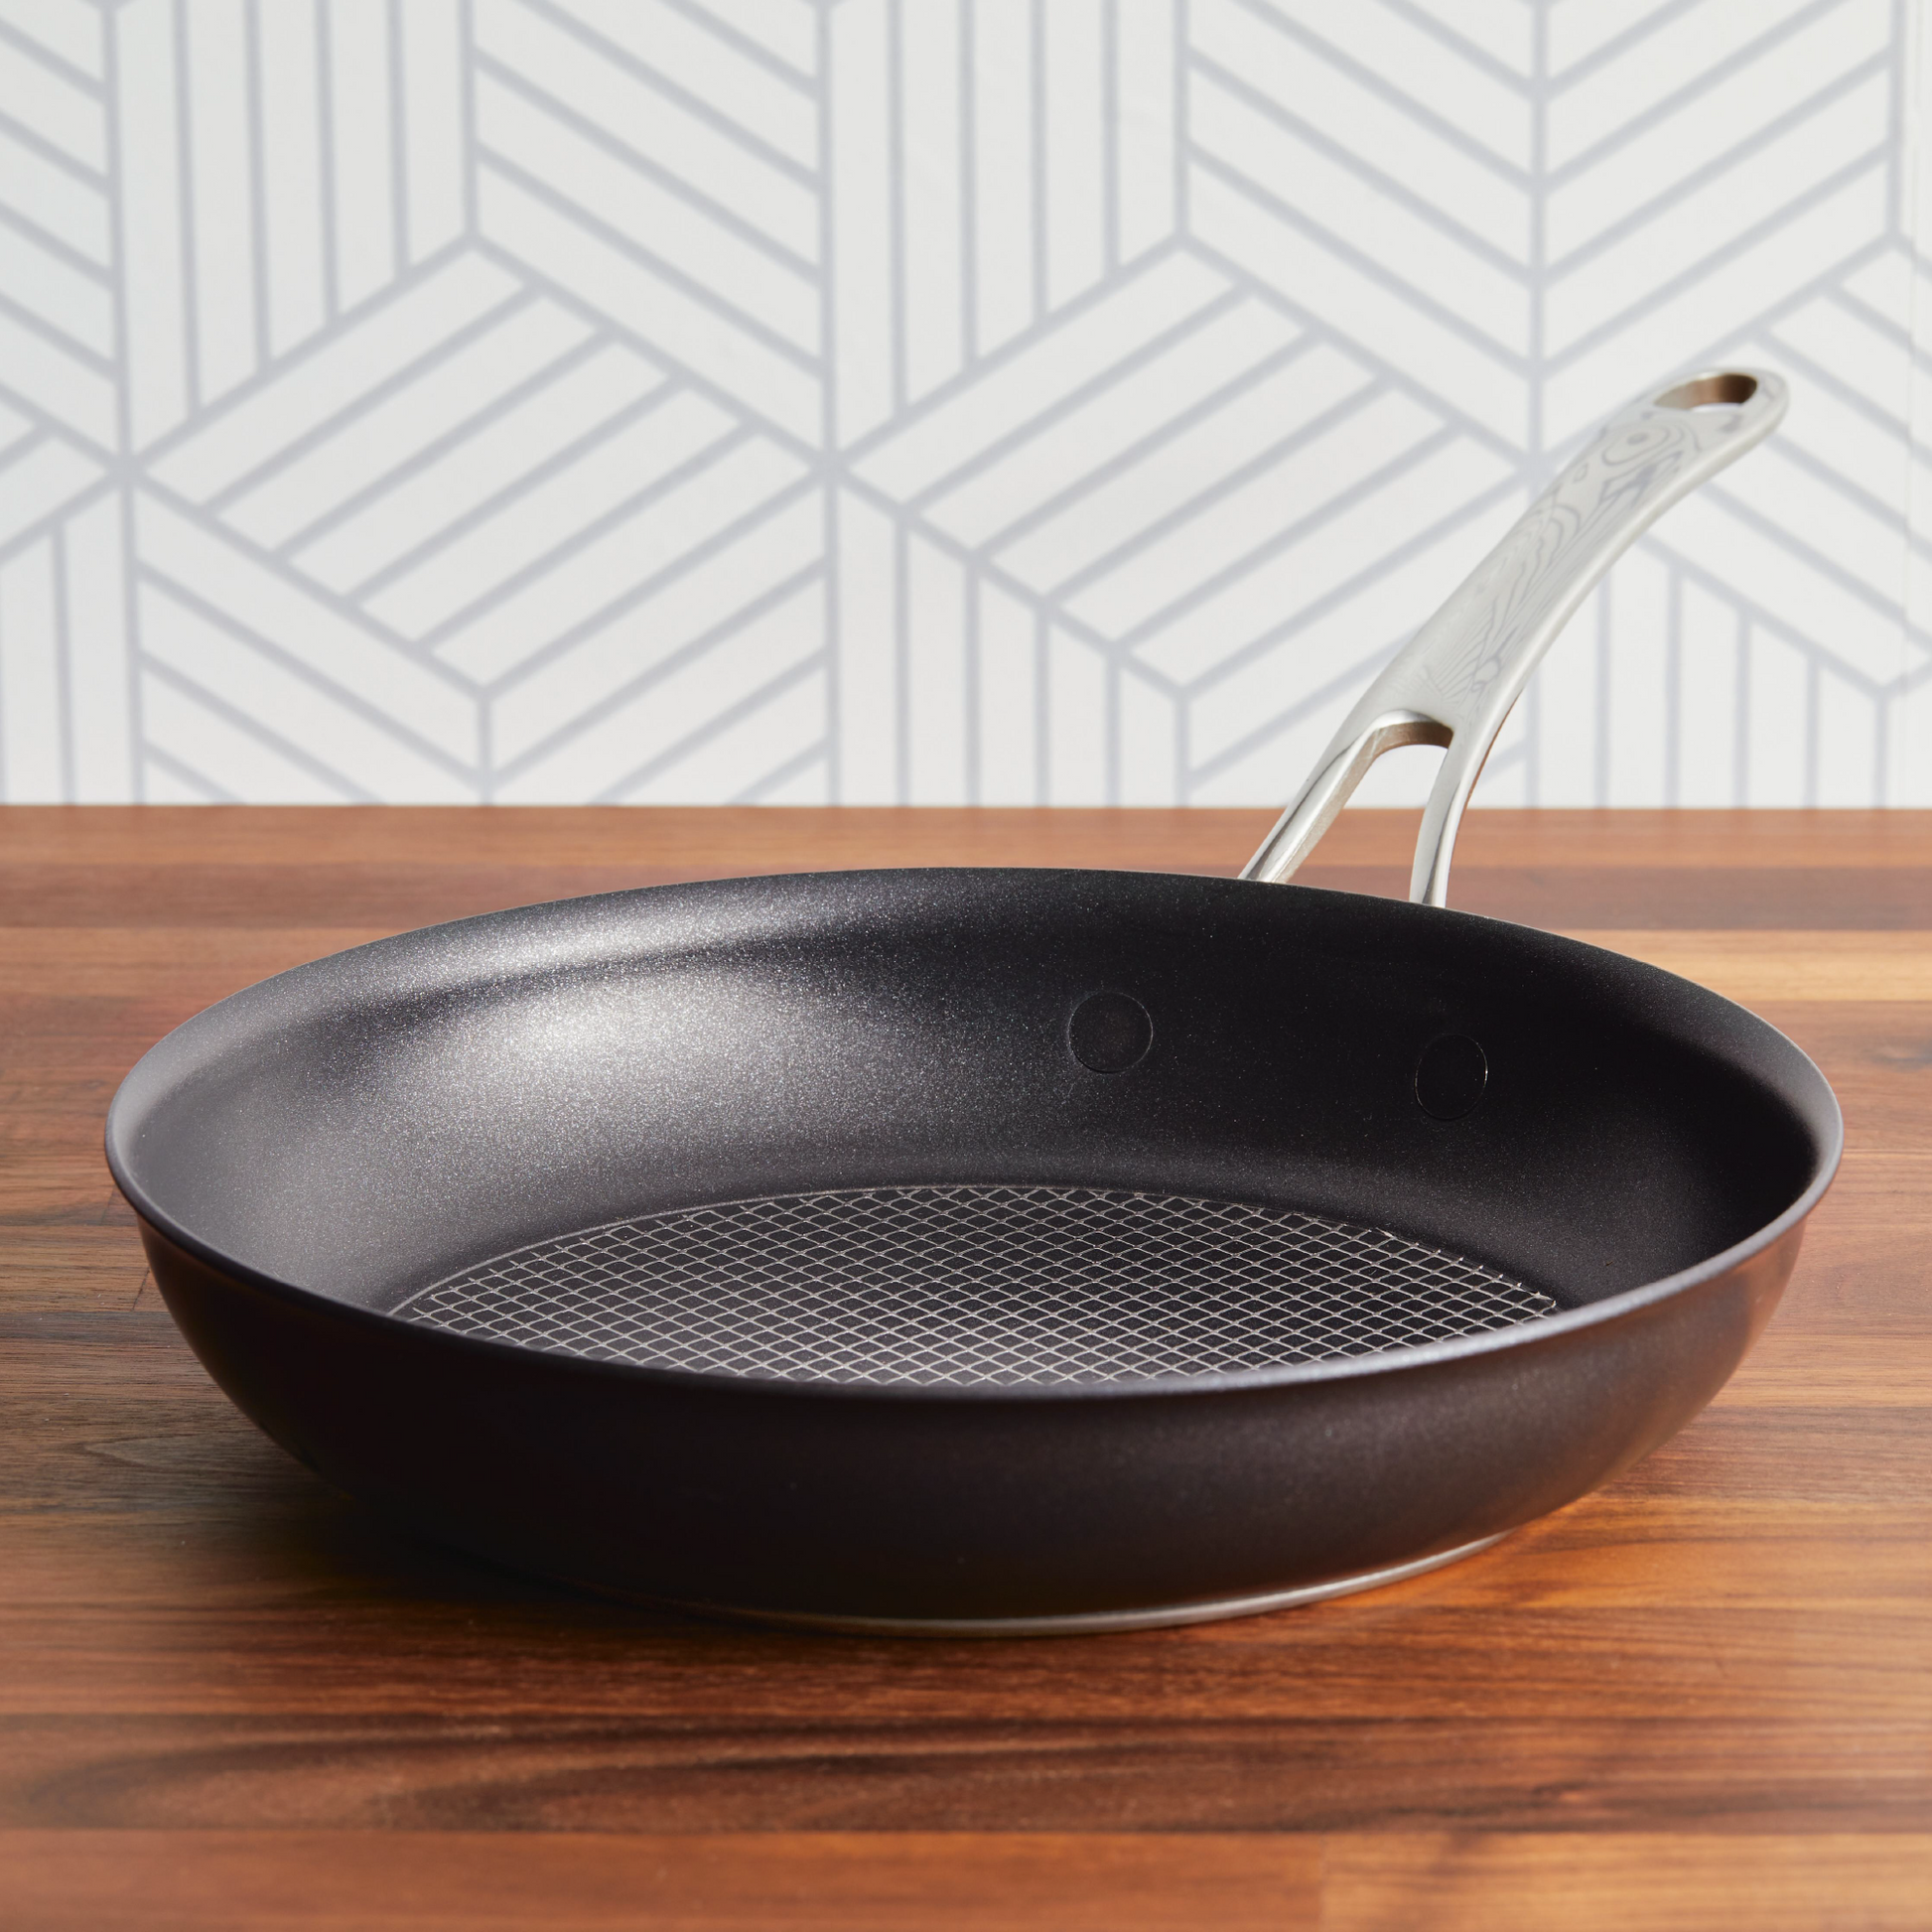 I Tried the New Anolon X Cookware to See if It Lives Up to the Hype